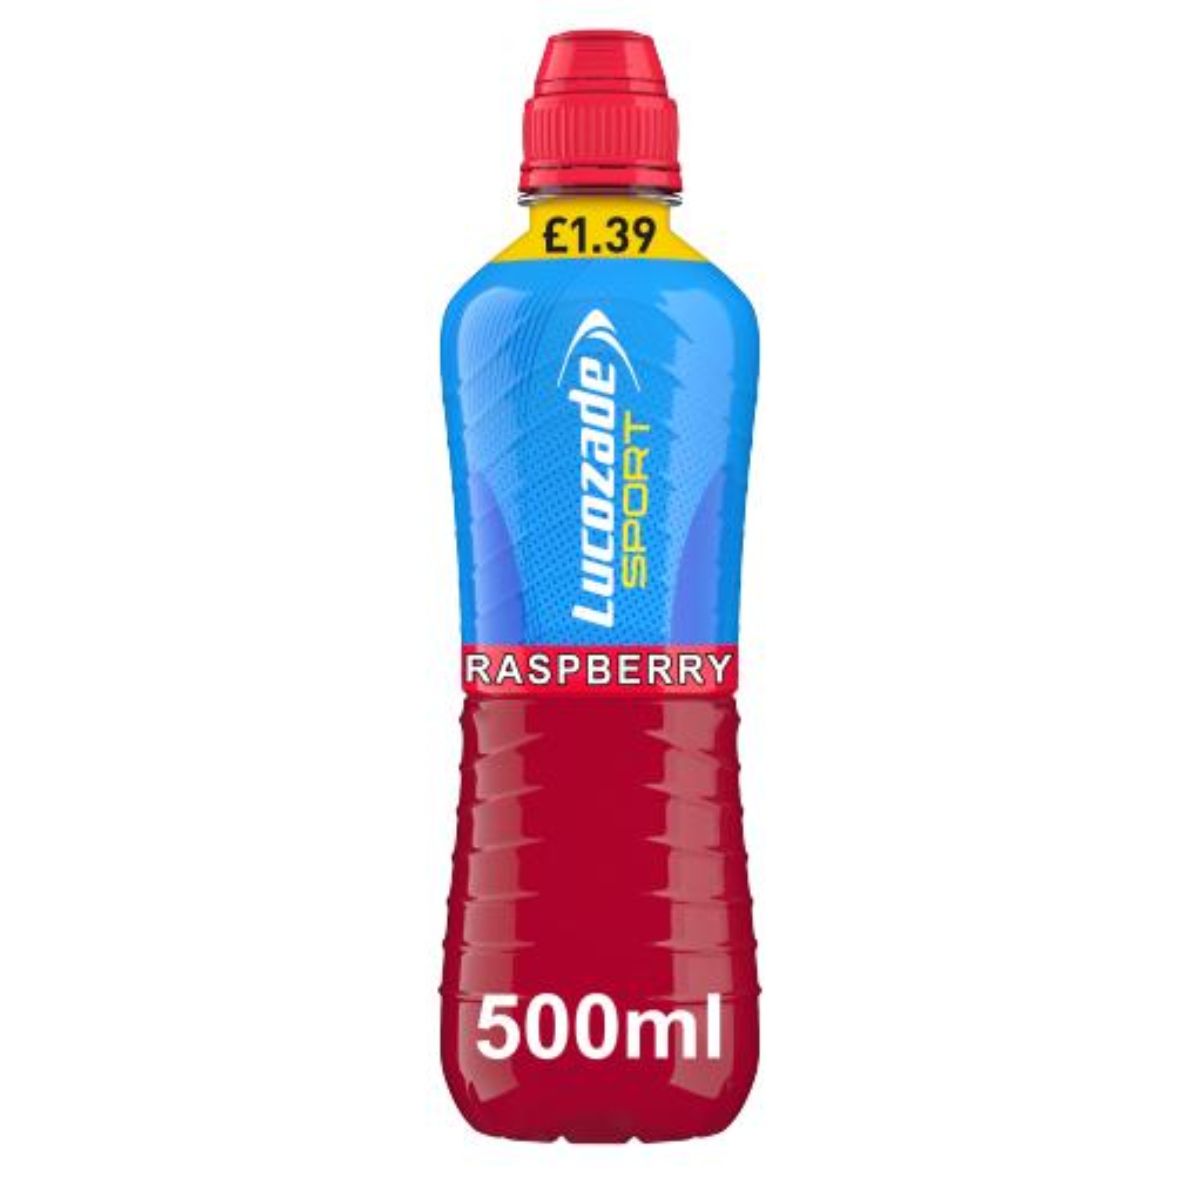 A bottle of Lucozade - Sport Drink Raspberry - 500ml on a white background.